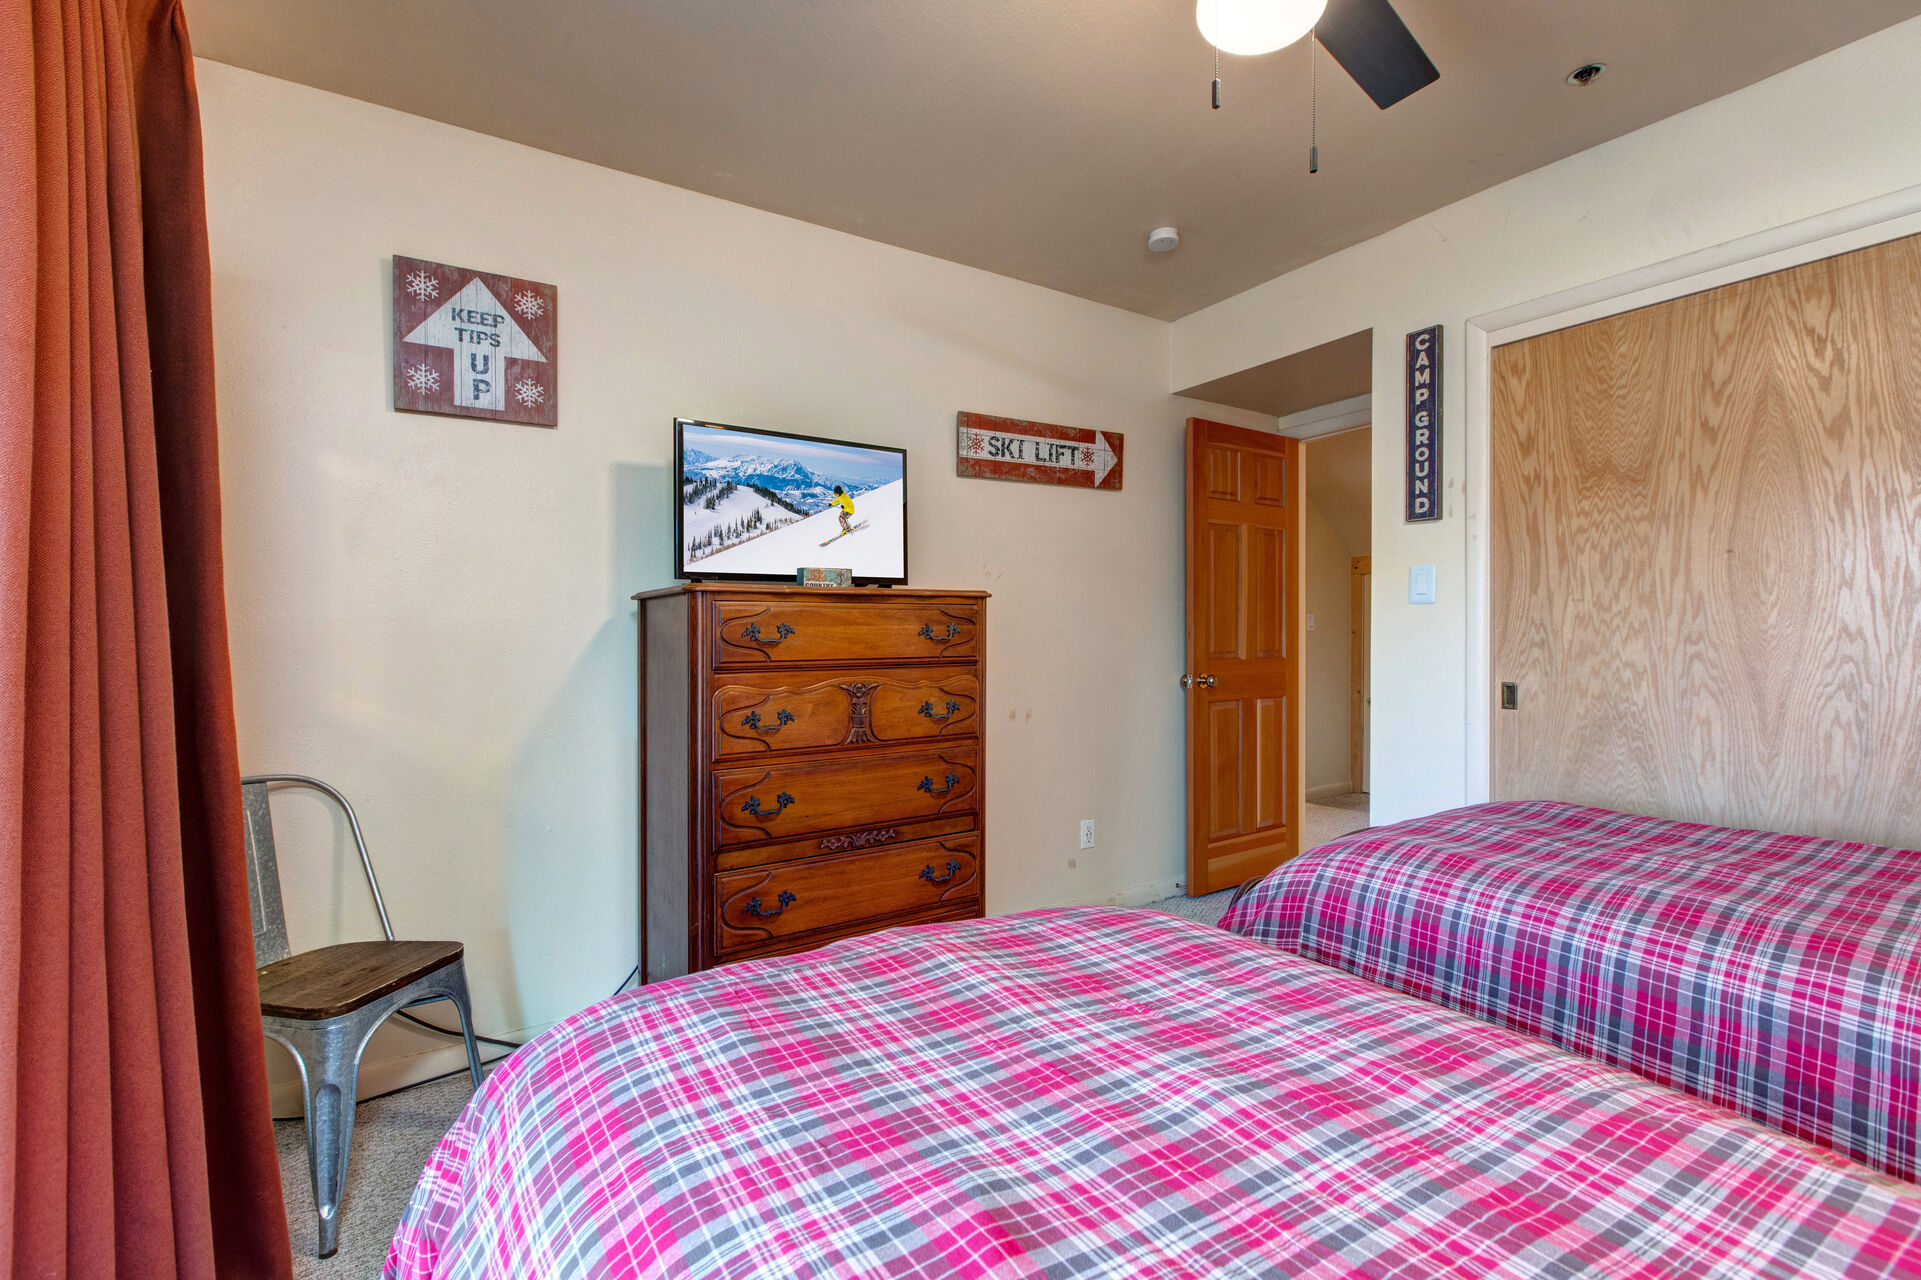 Bedroom 3 with 2 twin beds, TV, private patio entrance and full bath access